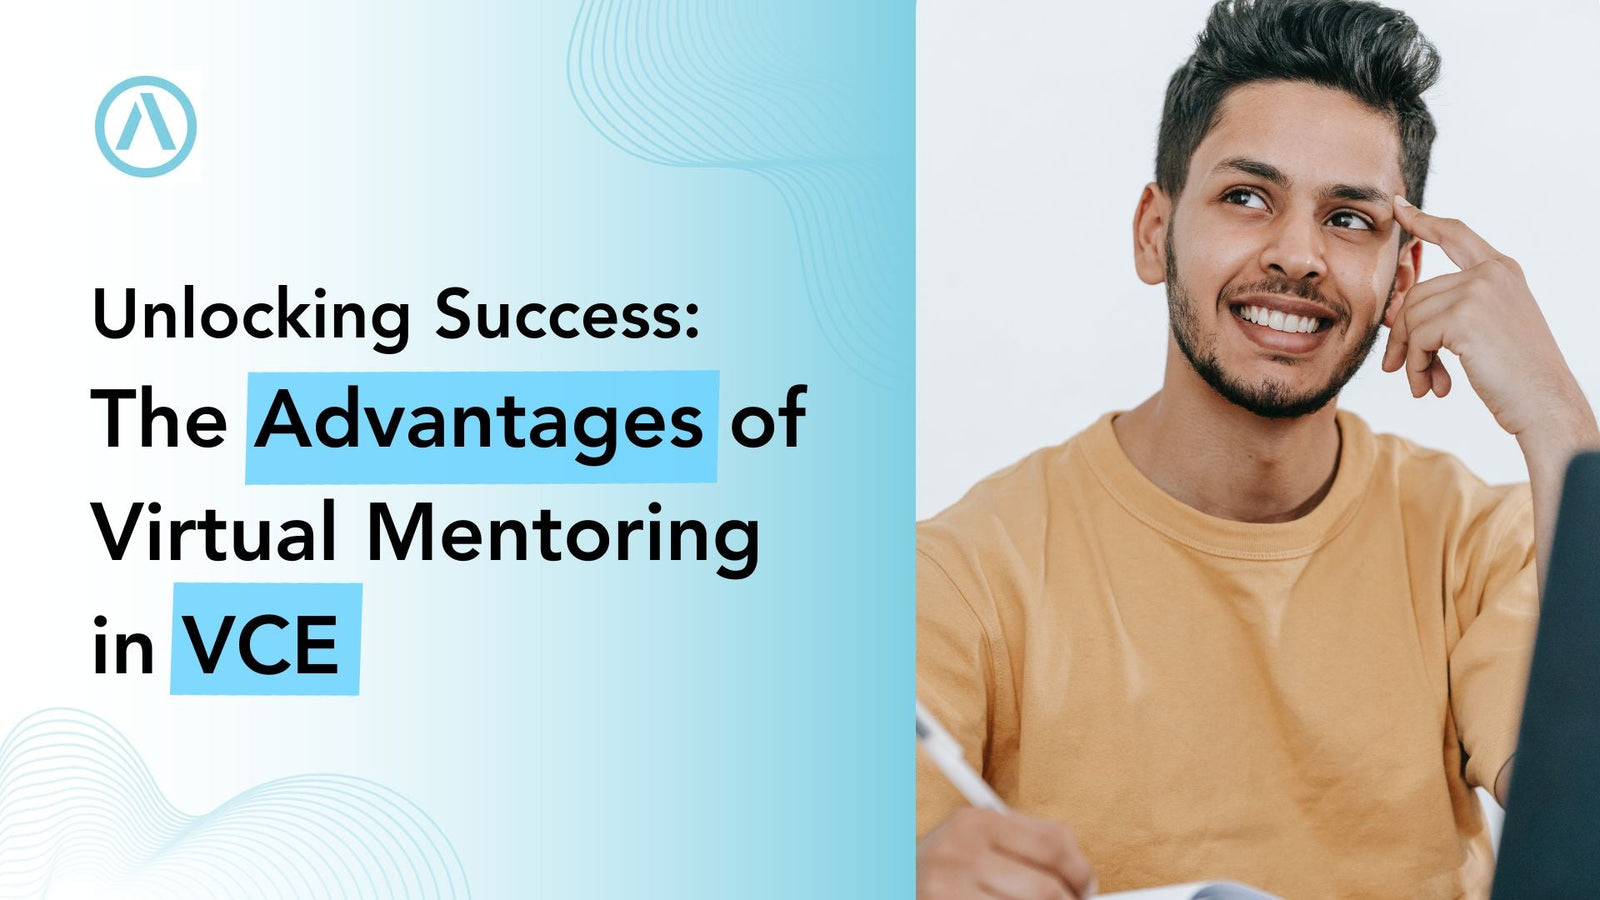 Unlocking Success: The Advantages of Virtual Mentoring in VCE - AirMentor